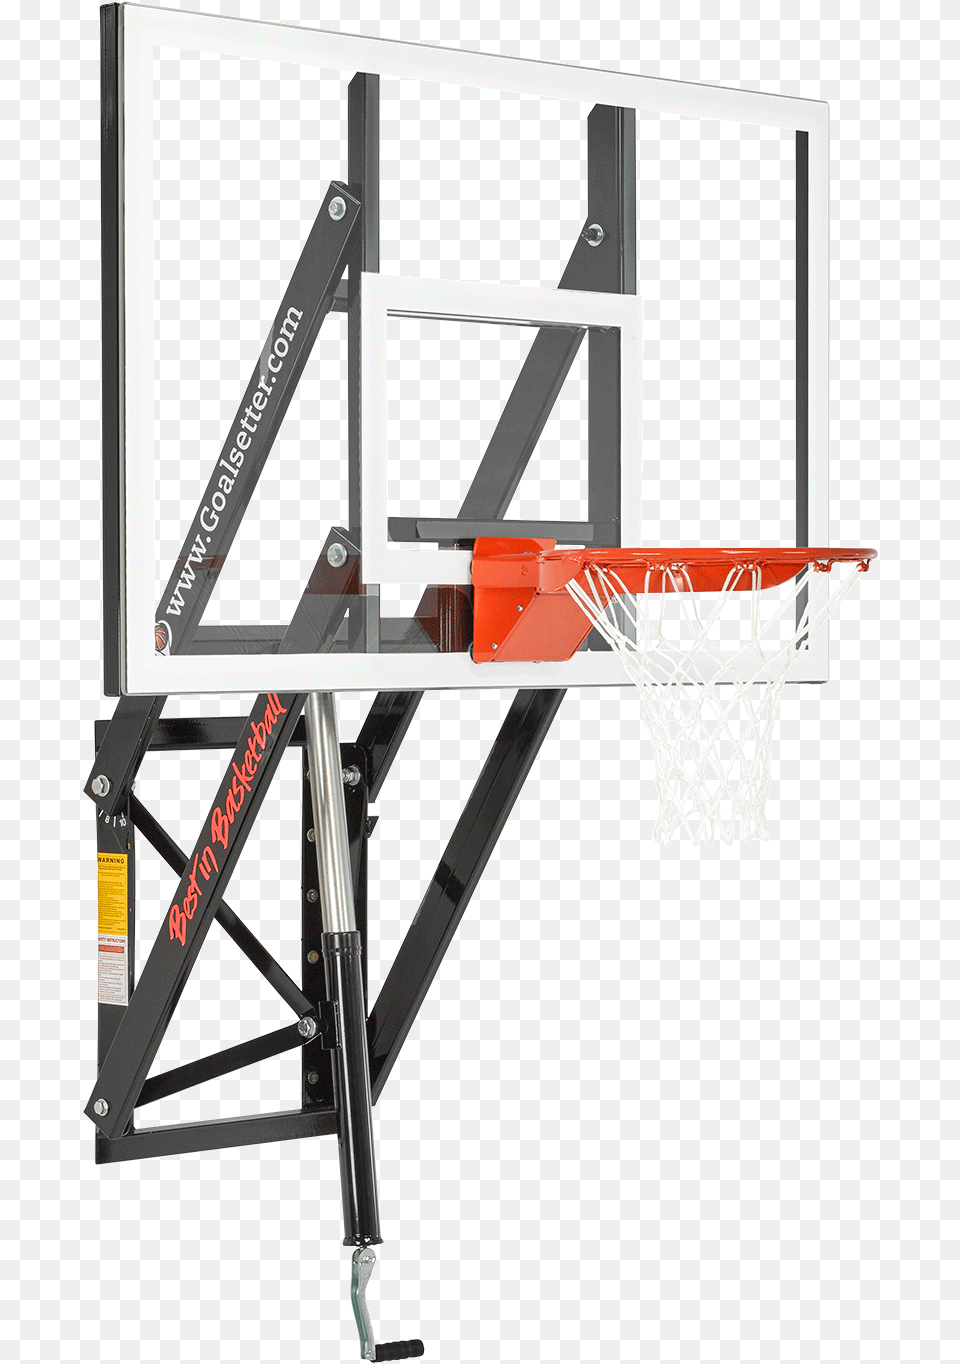 Allows You To Mount The Basketball Wall Mounted Basketball Hoops, Hoop Free Png Download